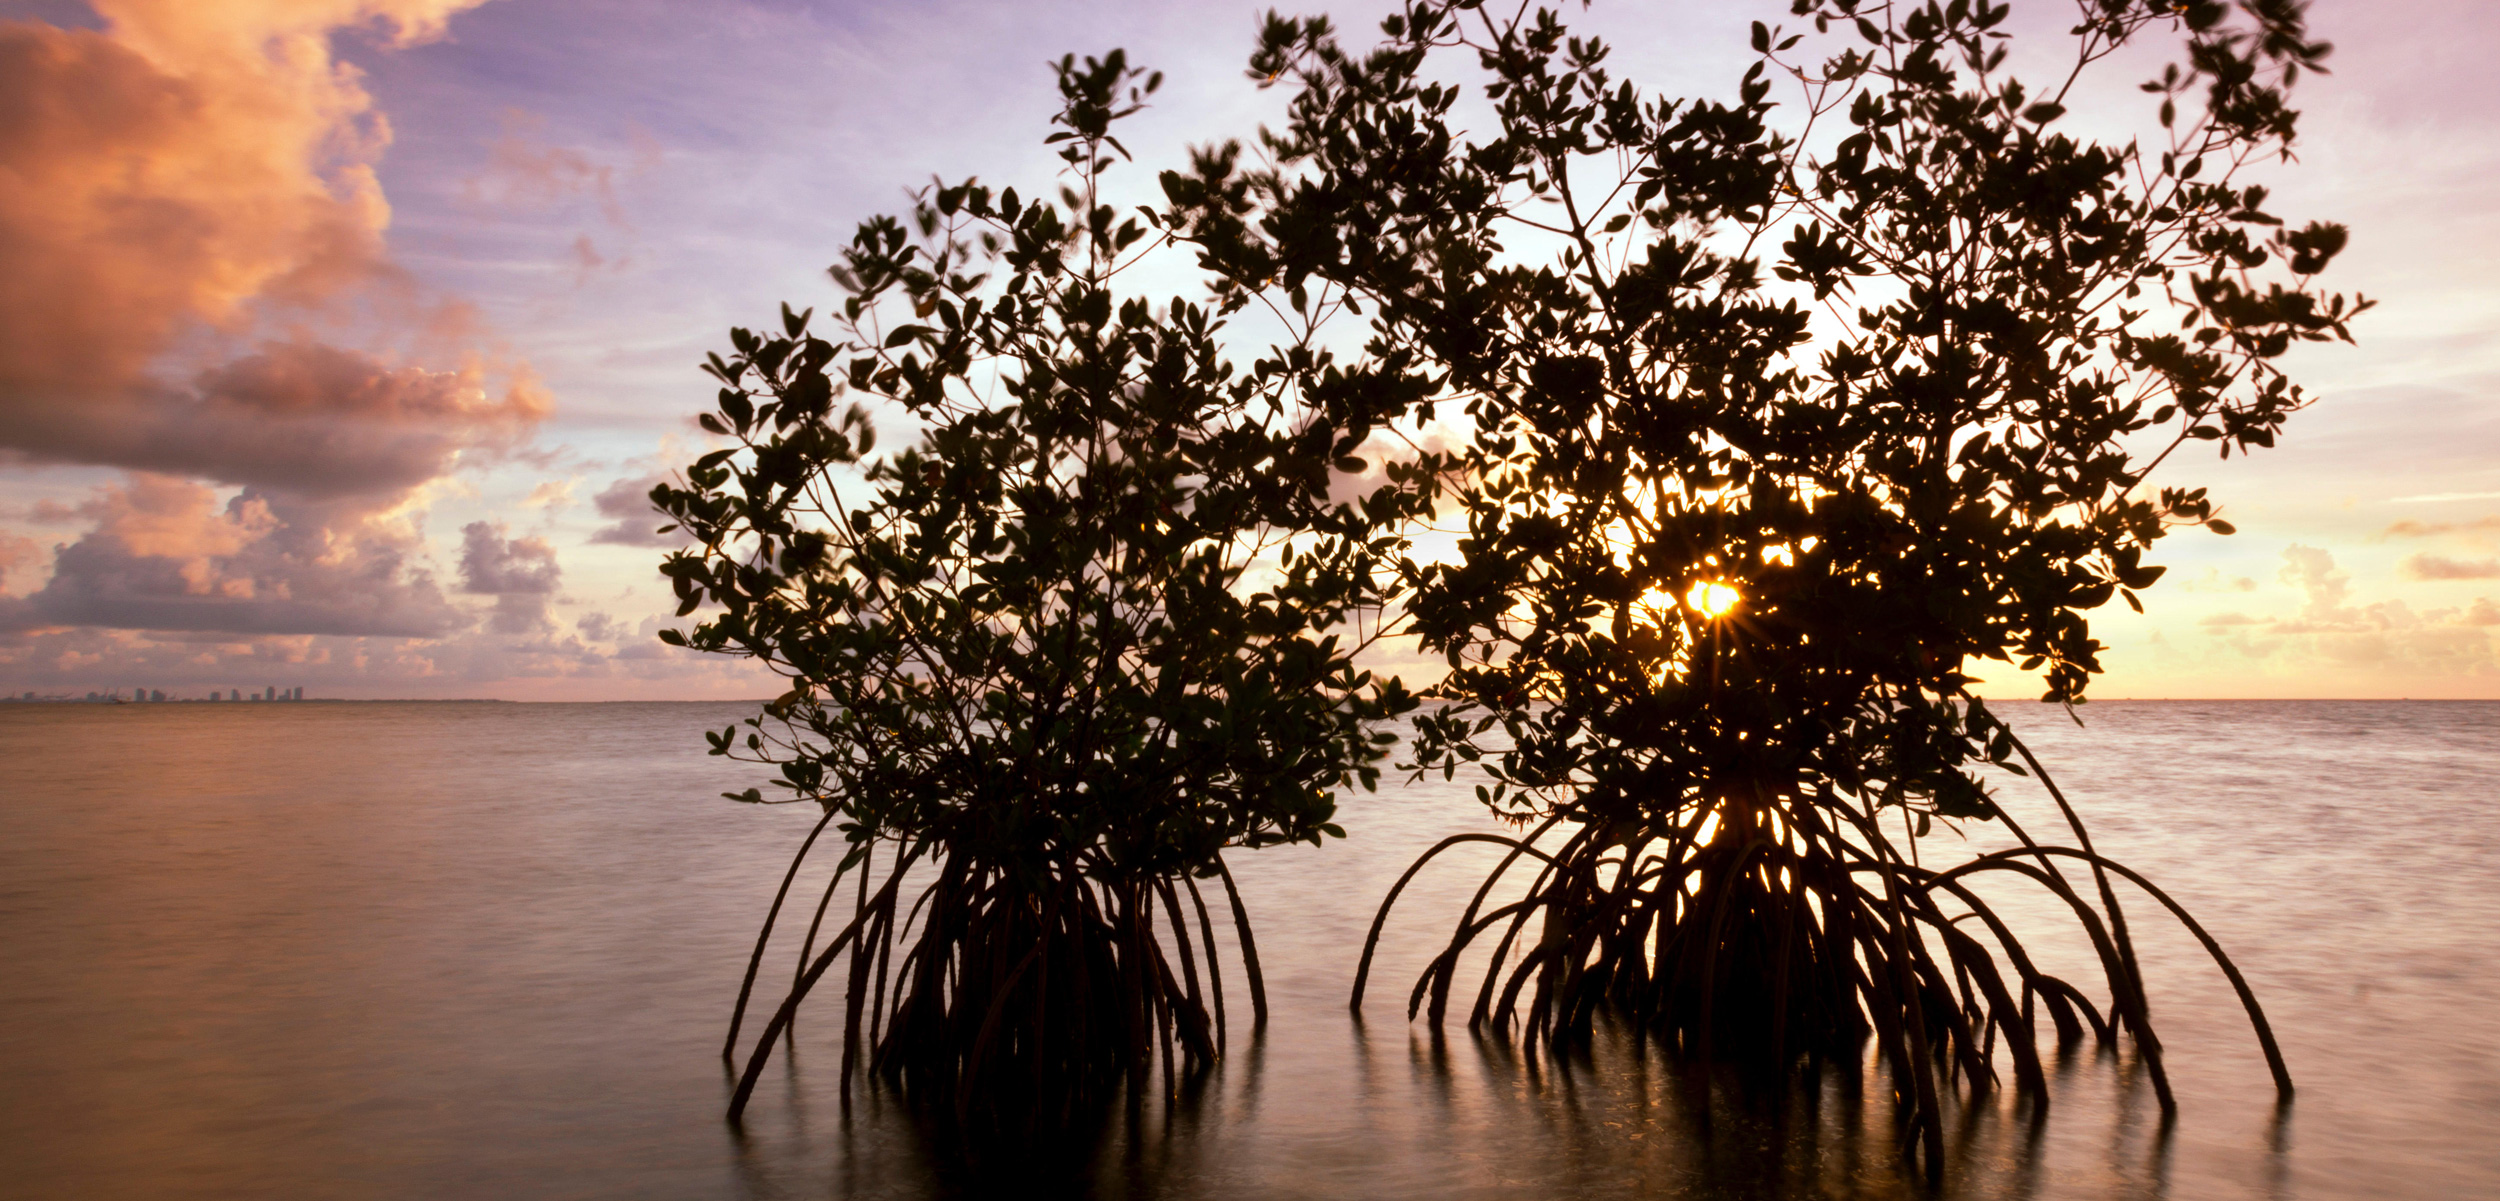 Mangroves are spreading throughout coastal Florida—and that’s not necessarily a good thing. Photo by Constance Mier/Alamy Stock Photo